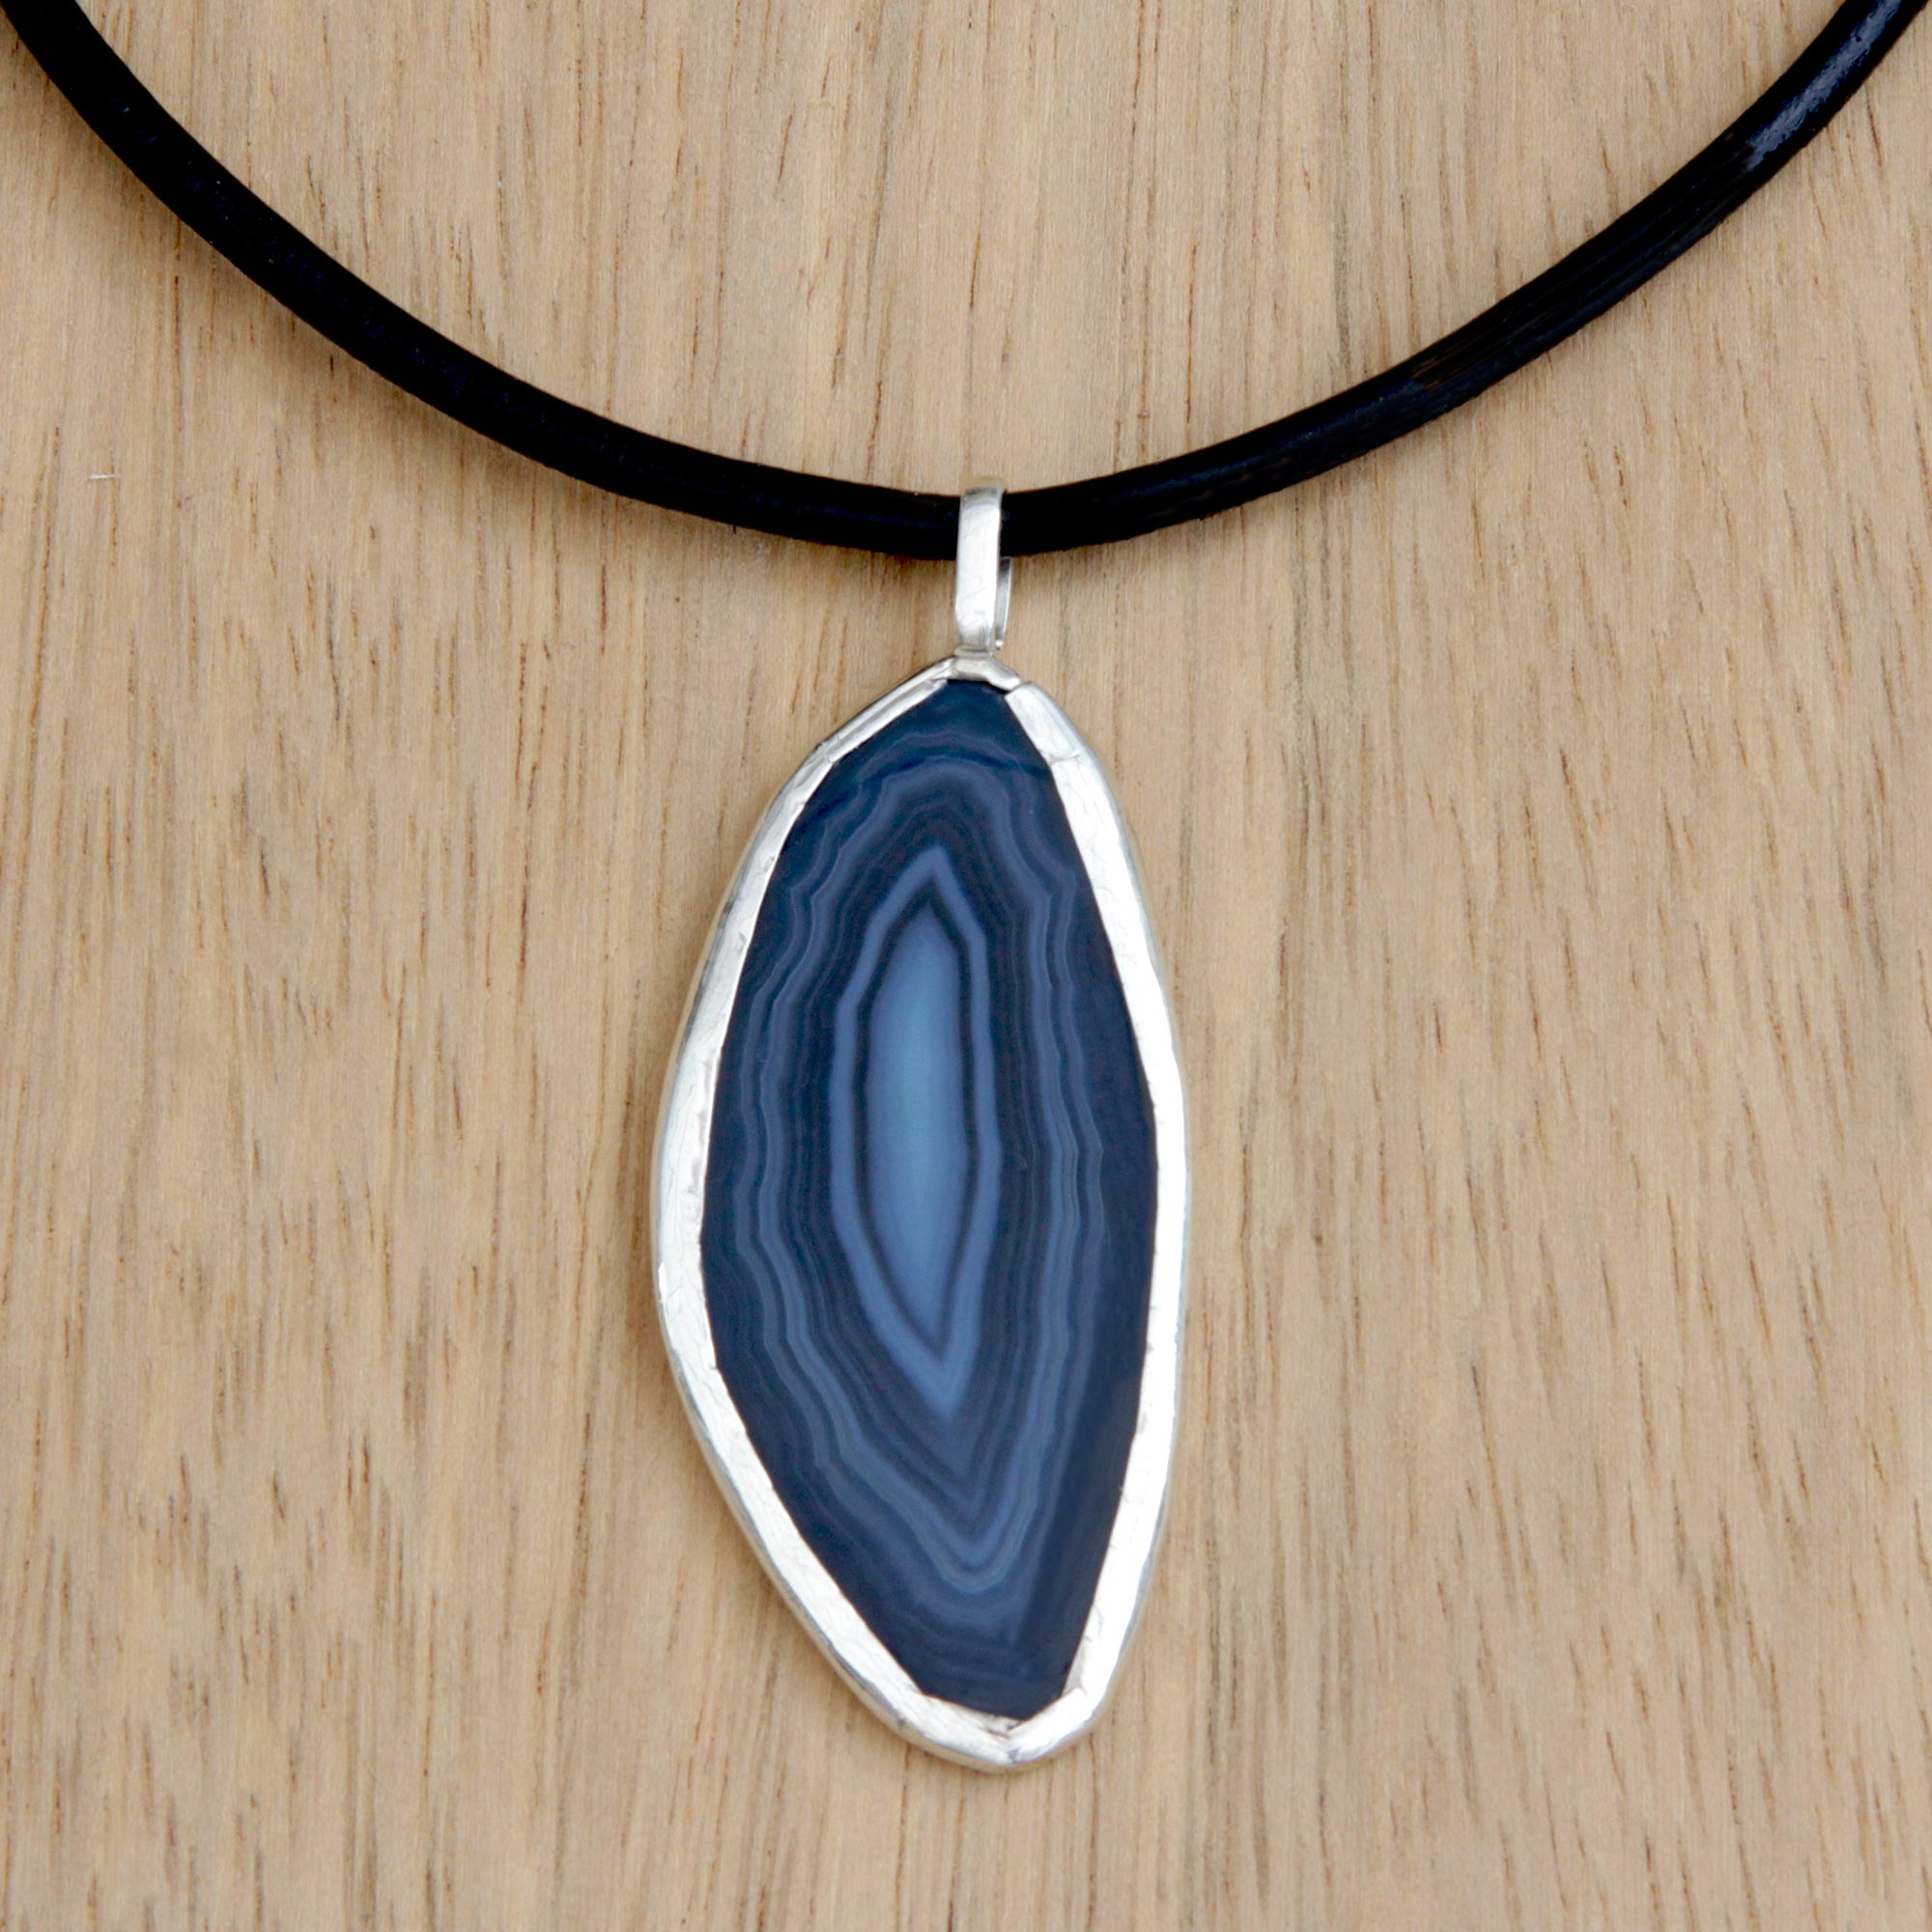 Agate Necklace Jewelry Sale, 70% OFF | www.angloamericancentre.it